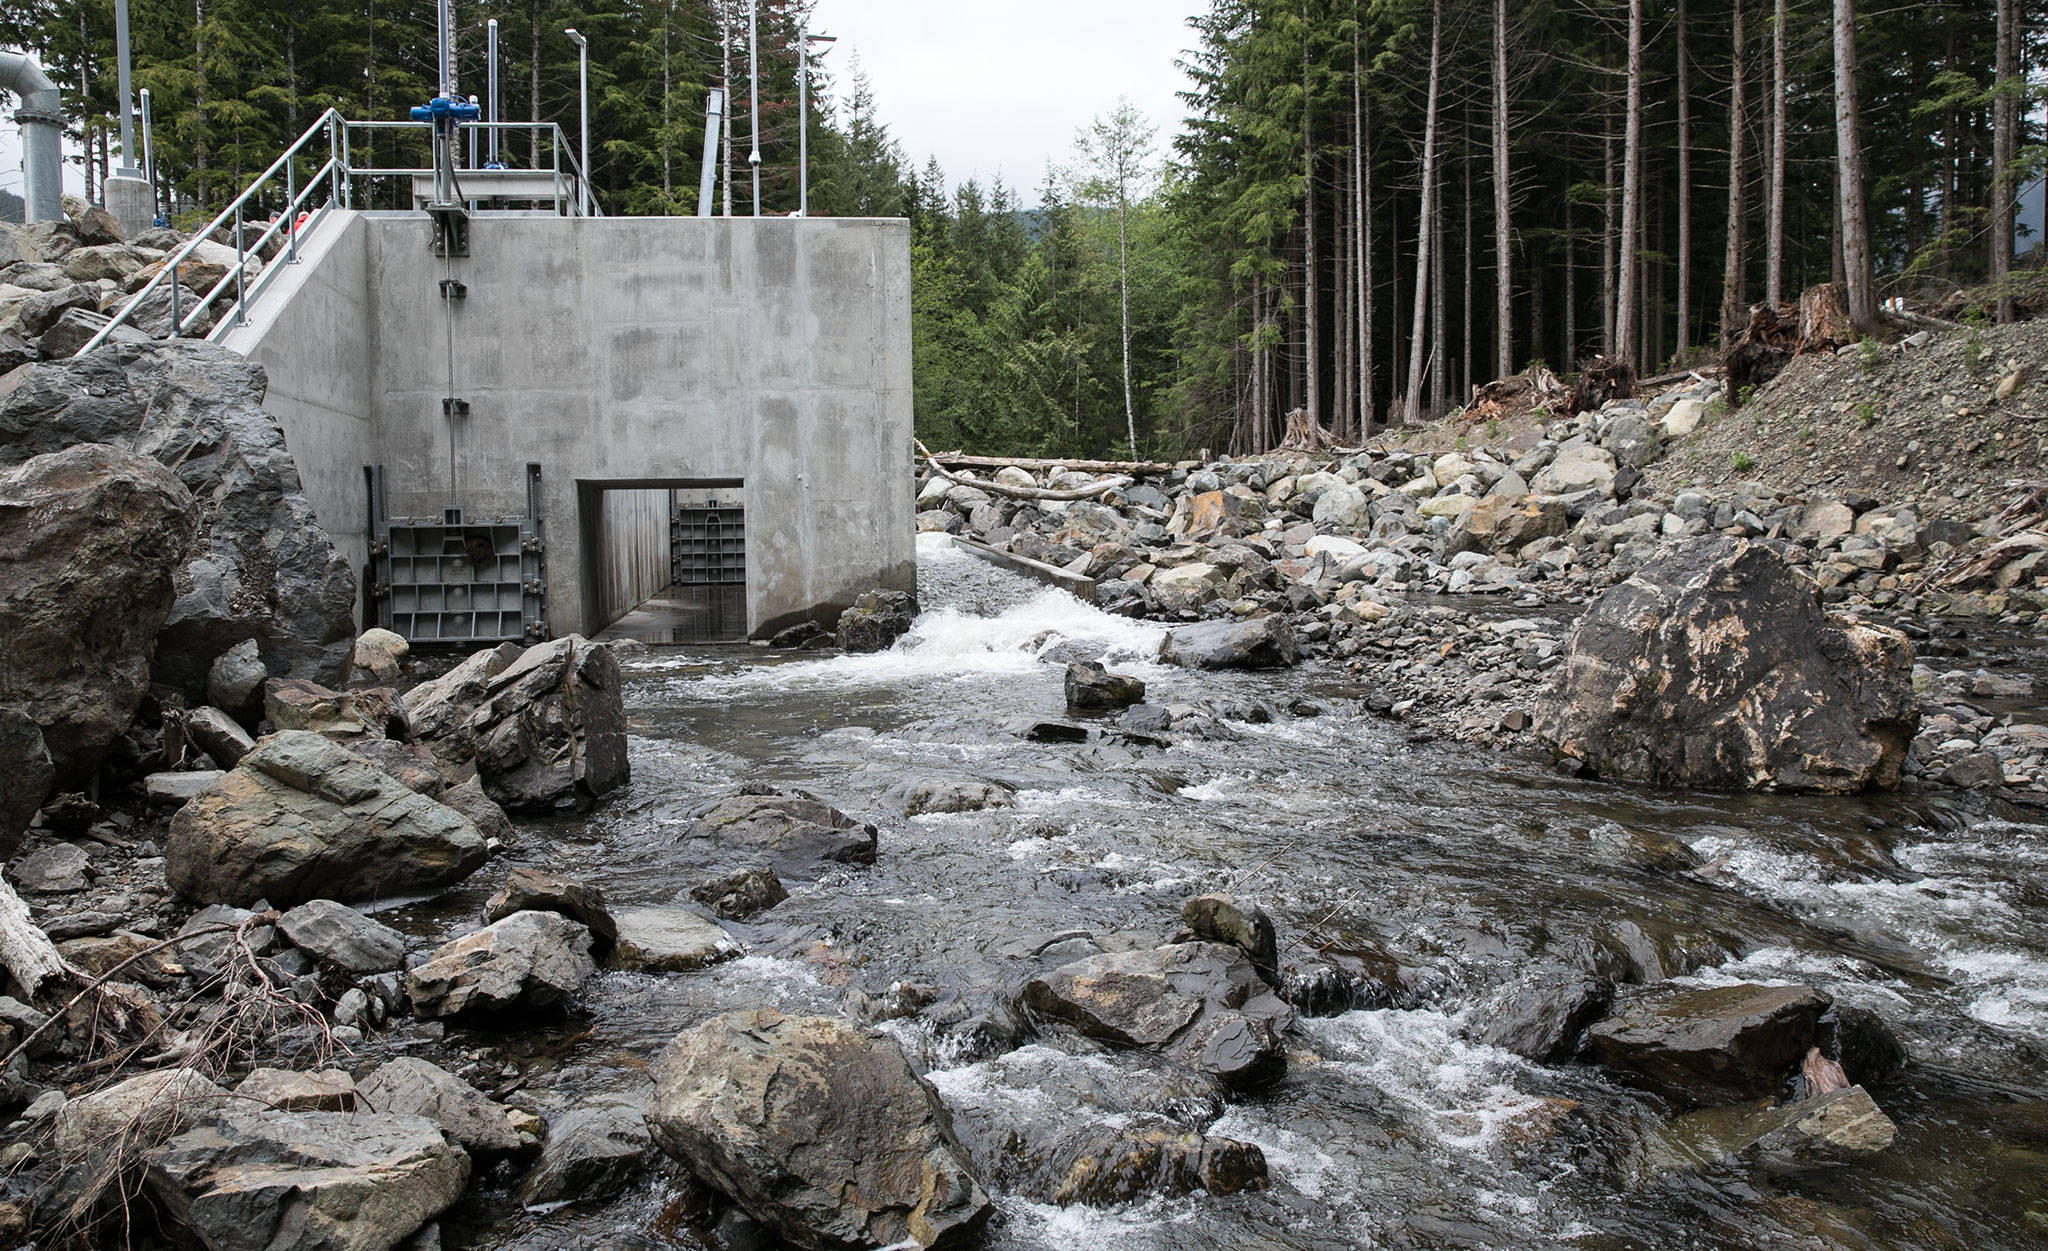 The Snohomish County Public Utility District unveiled two new small hydro projects in Snoqualmie Valley Thursday. (Lizz Giordano / The Herald)